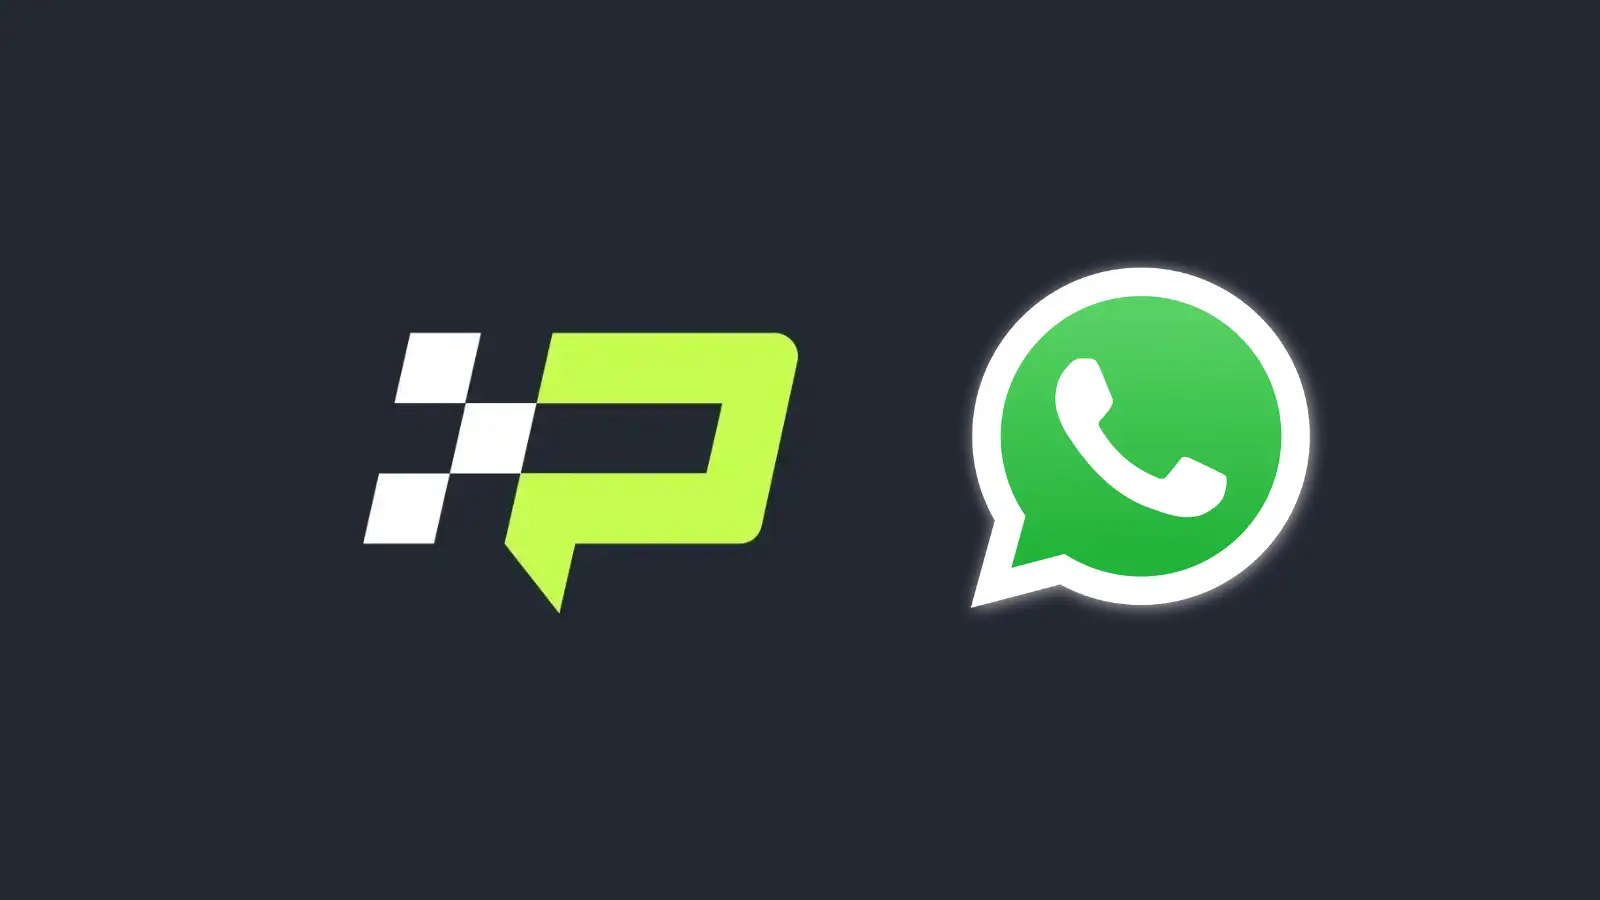 Follow PlanetF1.com’s WhatsApp channel for all the F1 breaking news!